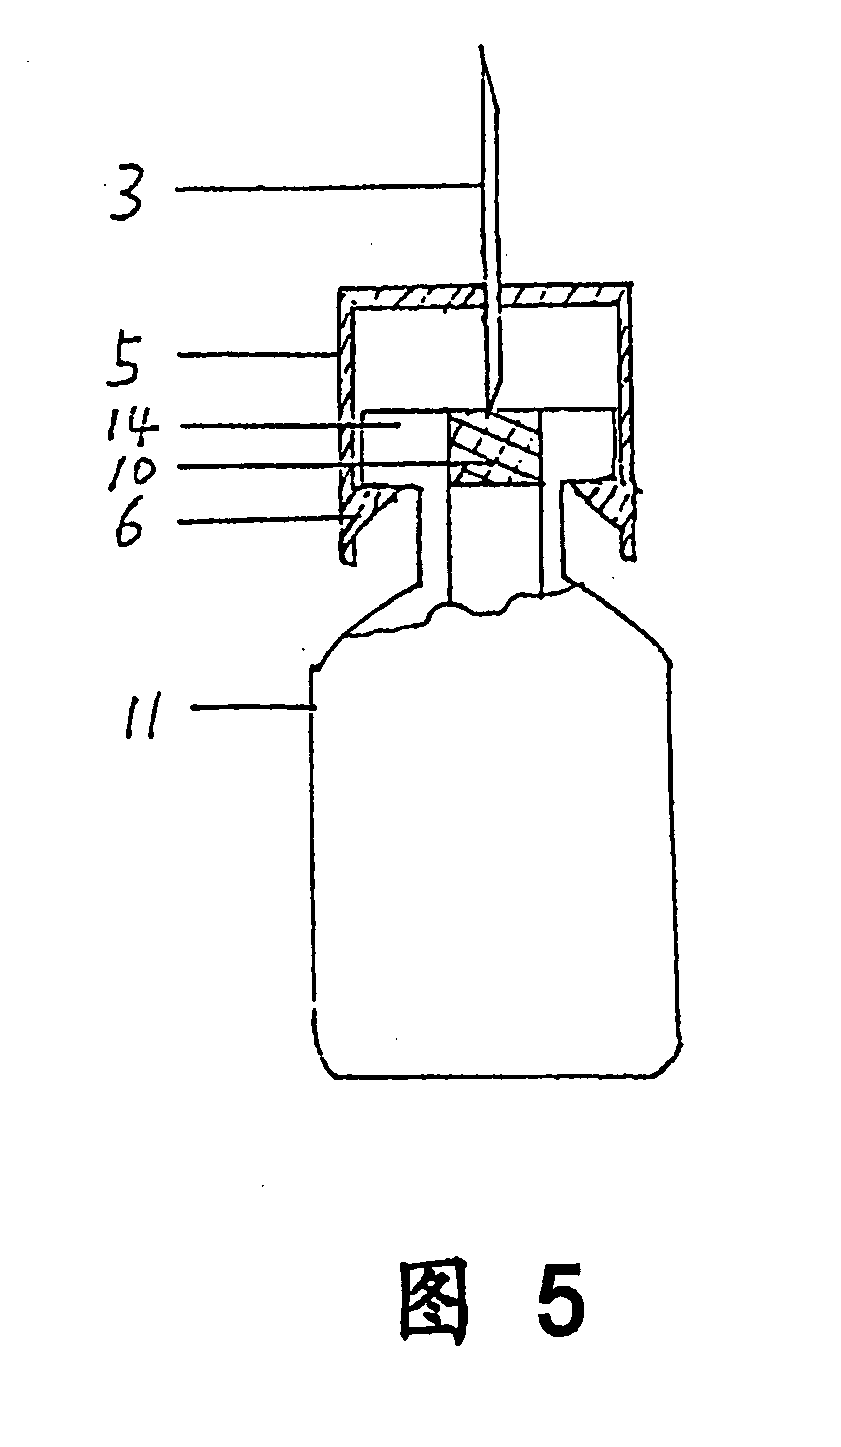 Drug Mixing and Delivery Device